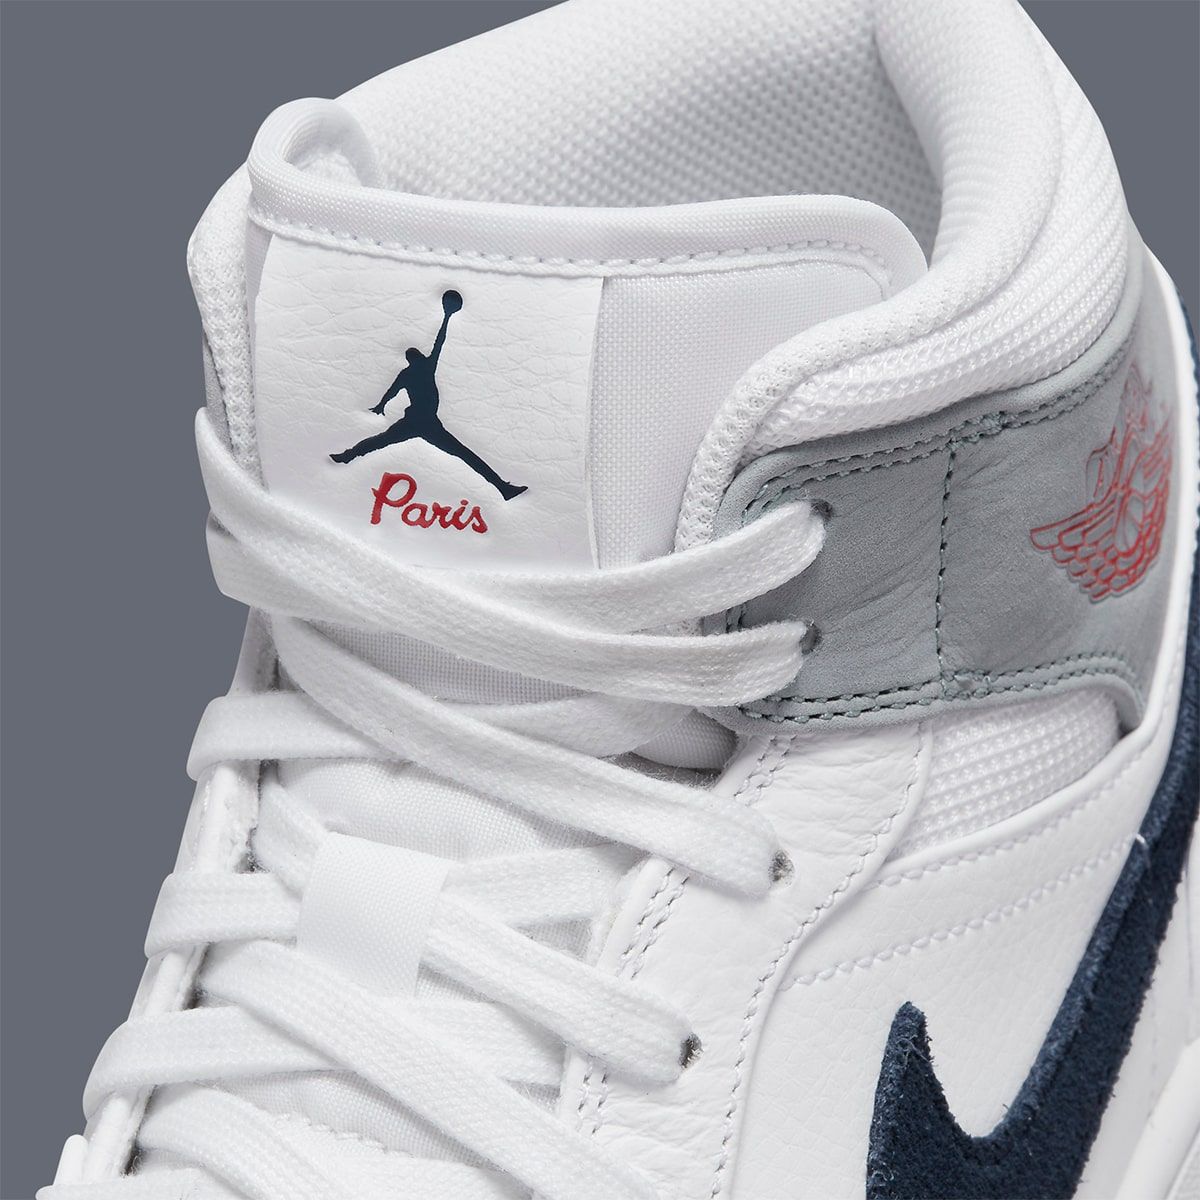 elephant to play referee Where to Buy the Air Jordan 1 Mid "Paris" | HOUSE OF HEAT